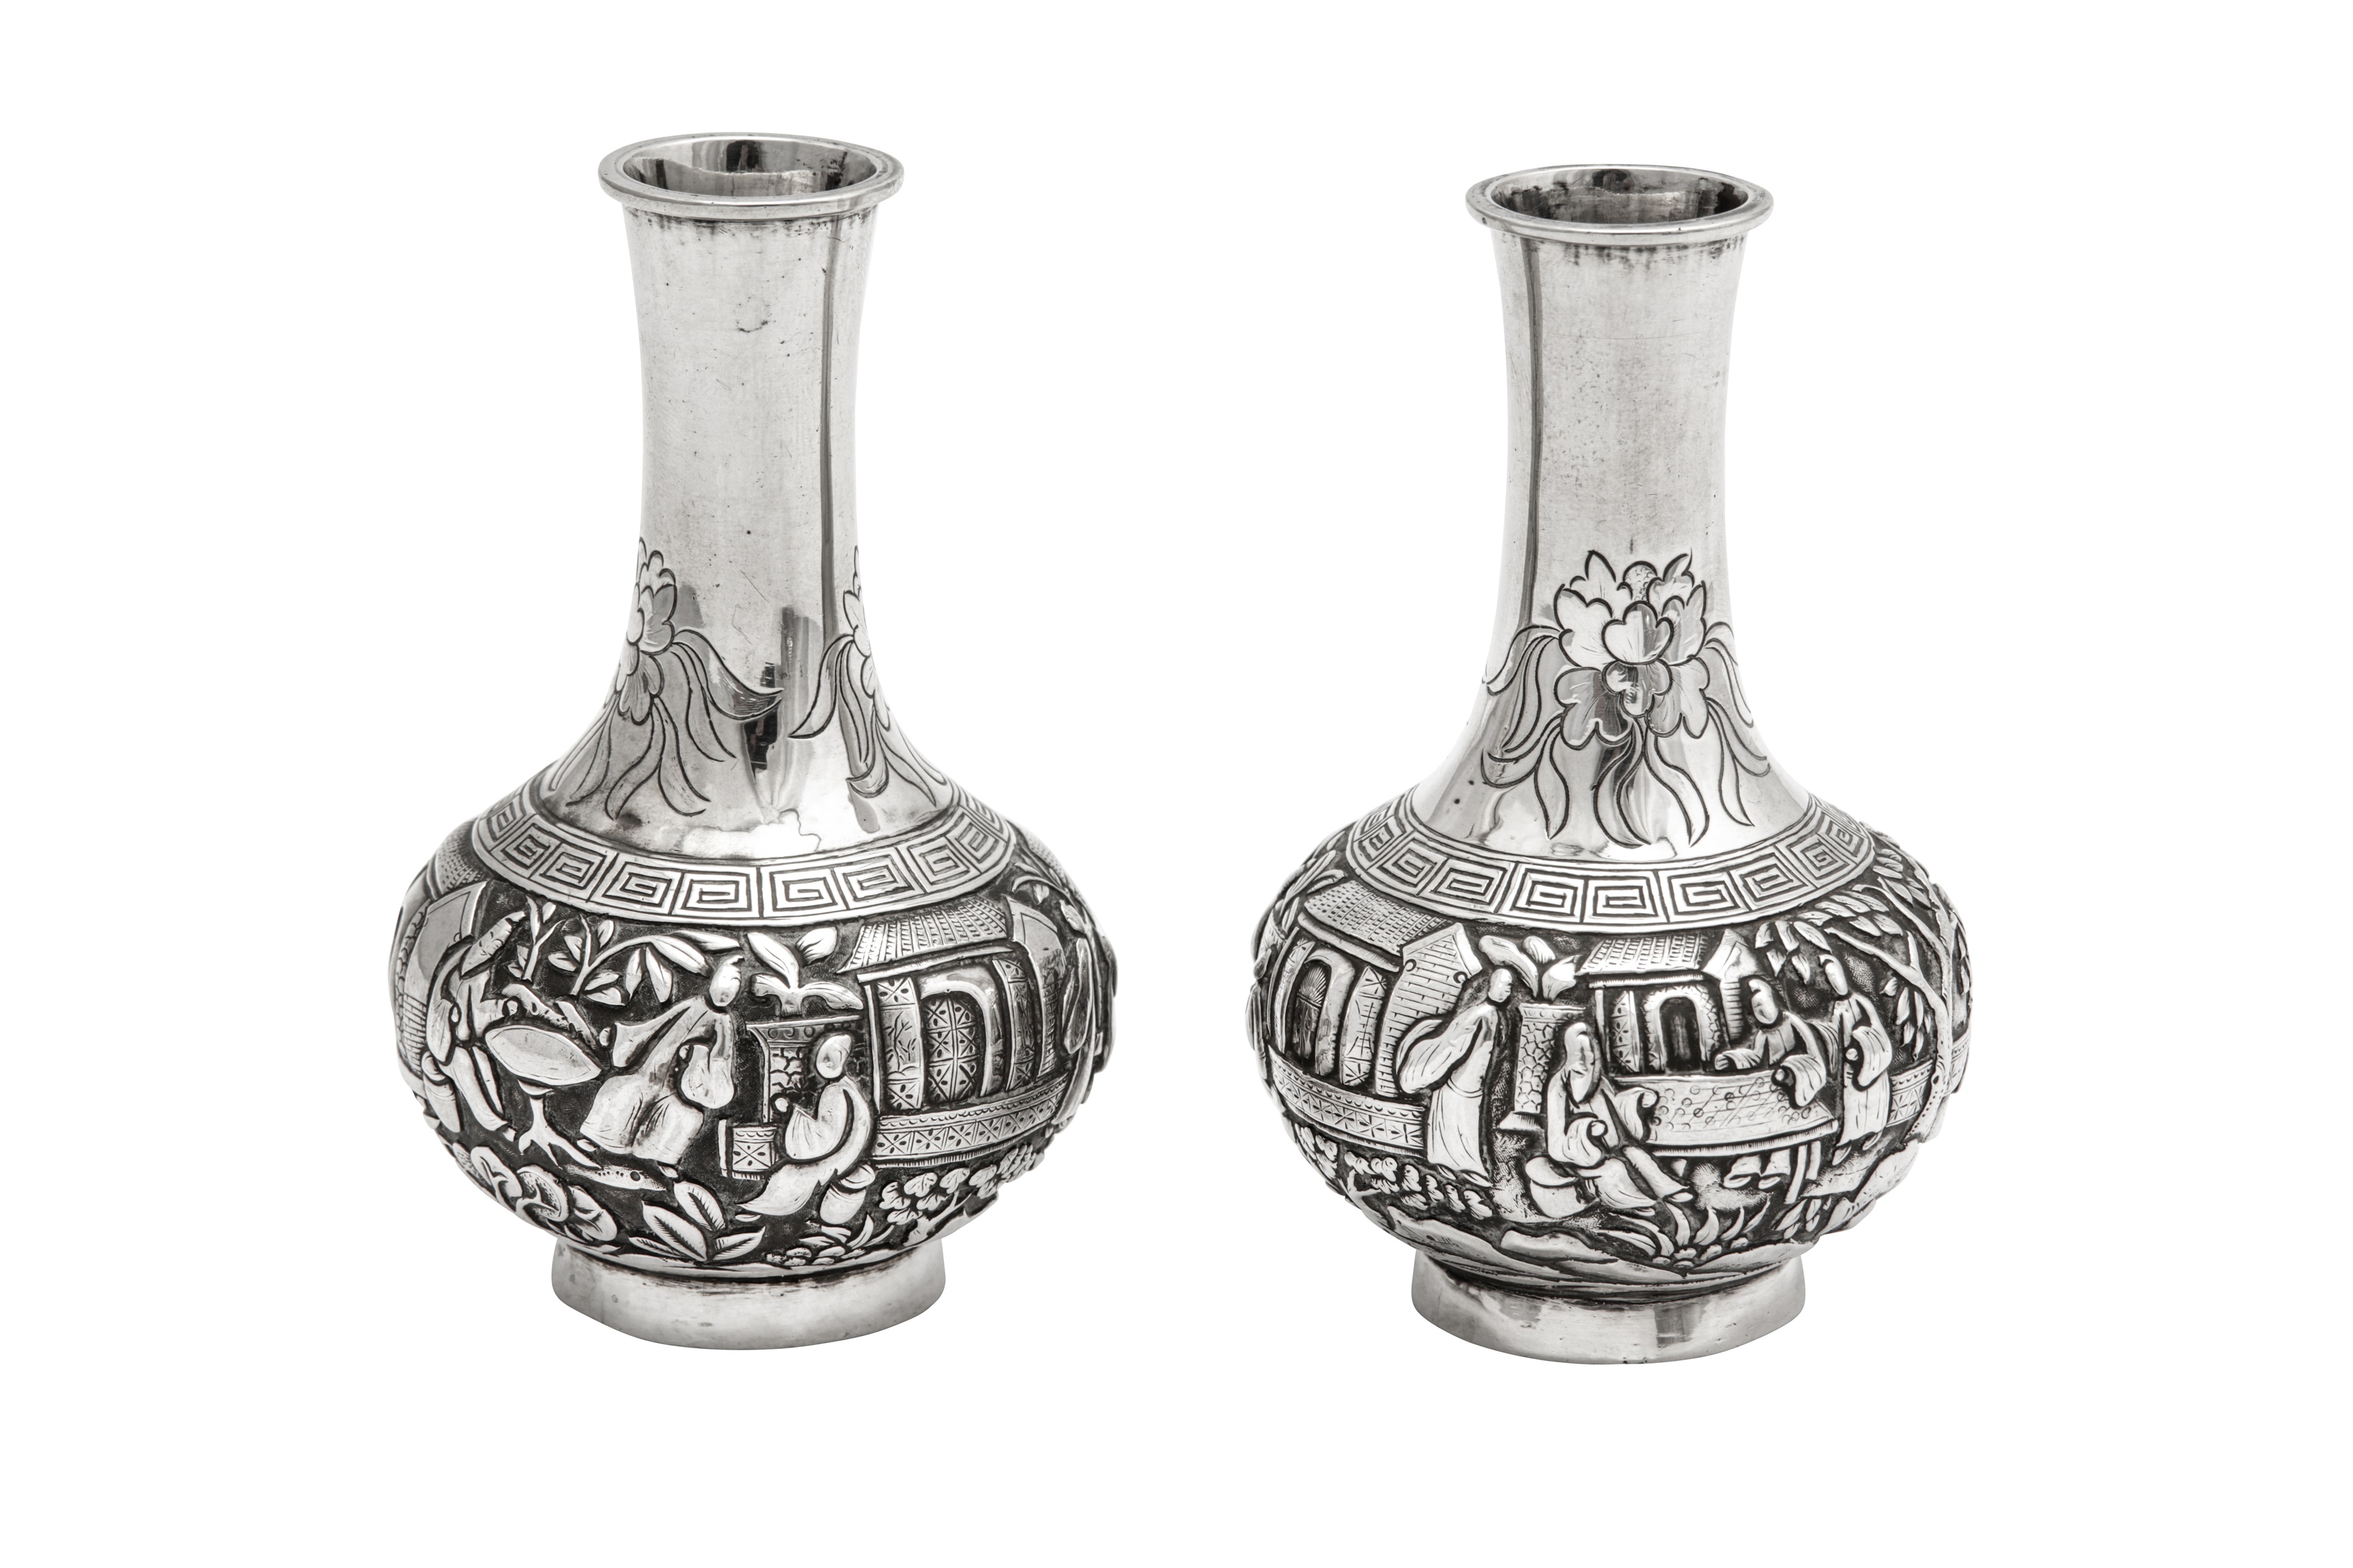 A pair of late 19th / early 20th century Chinese Export silver miniature vases, Canton circa 1900, r - Image 2 of 3